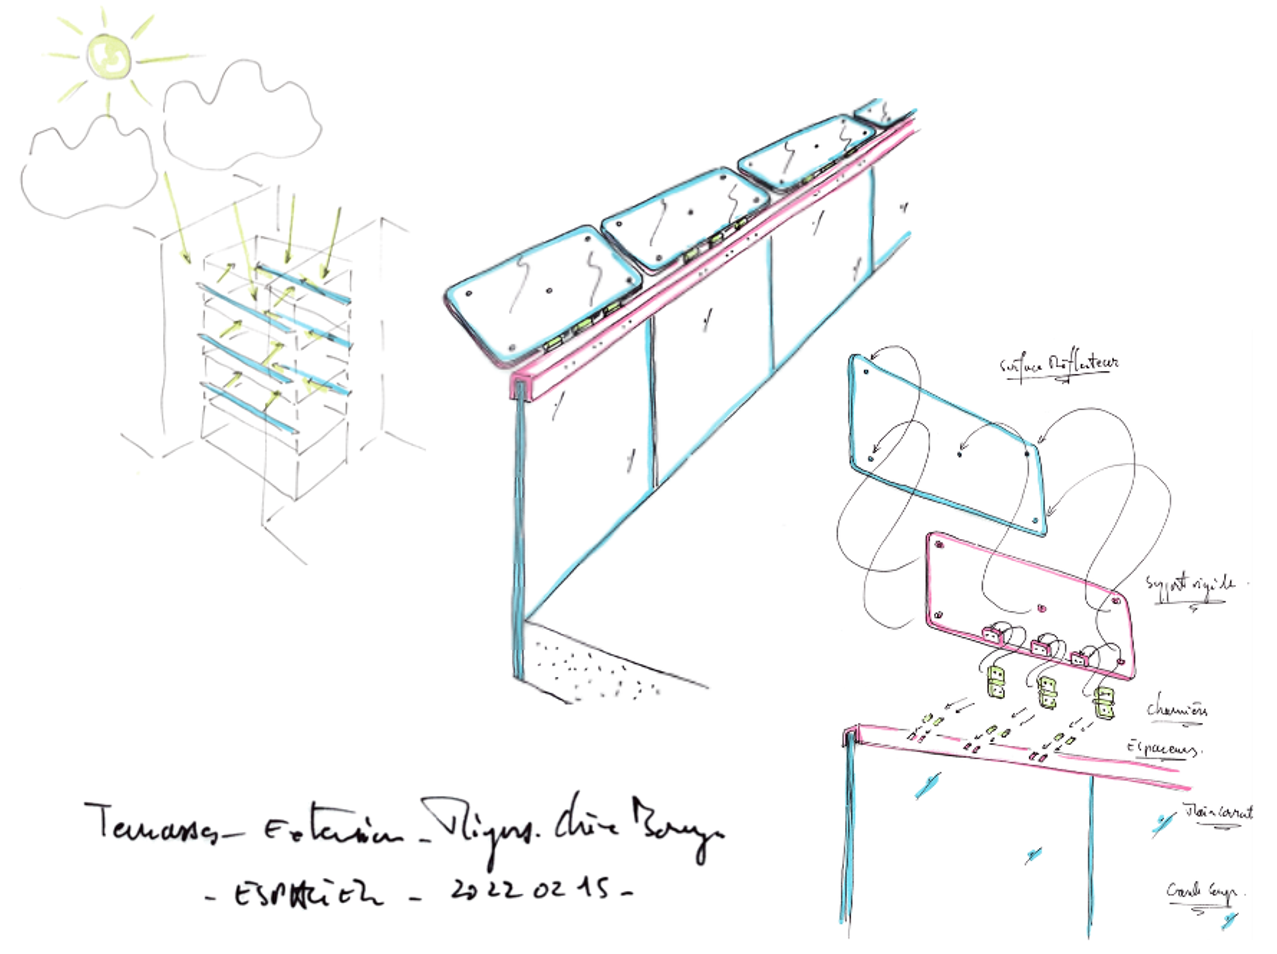 Espaciel sketch with reflector drawings and building